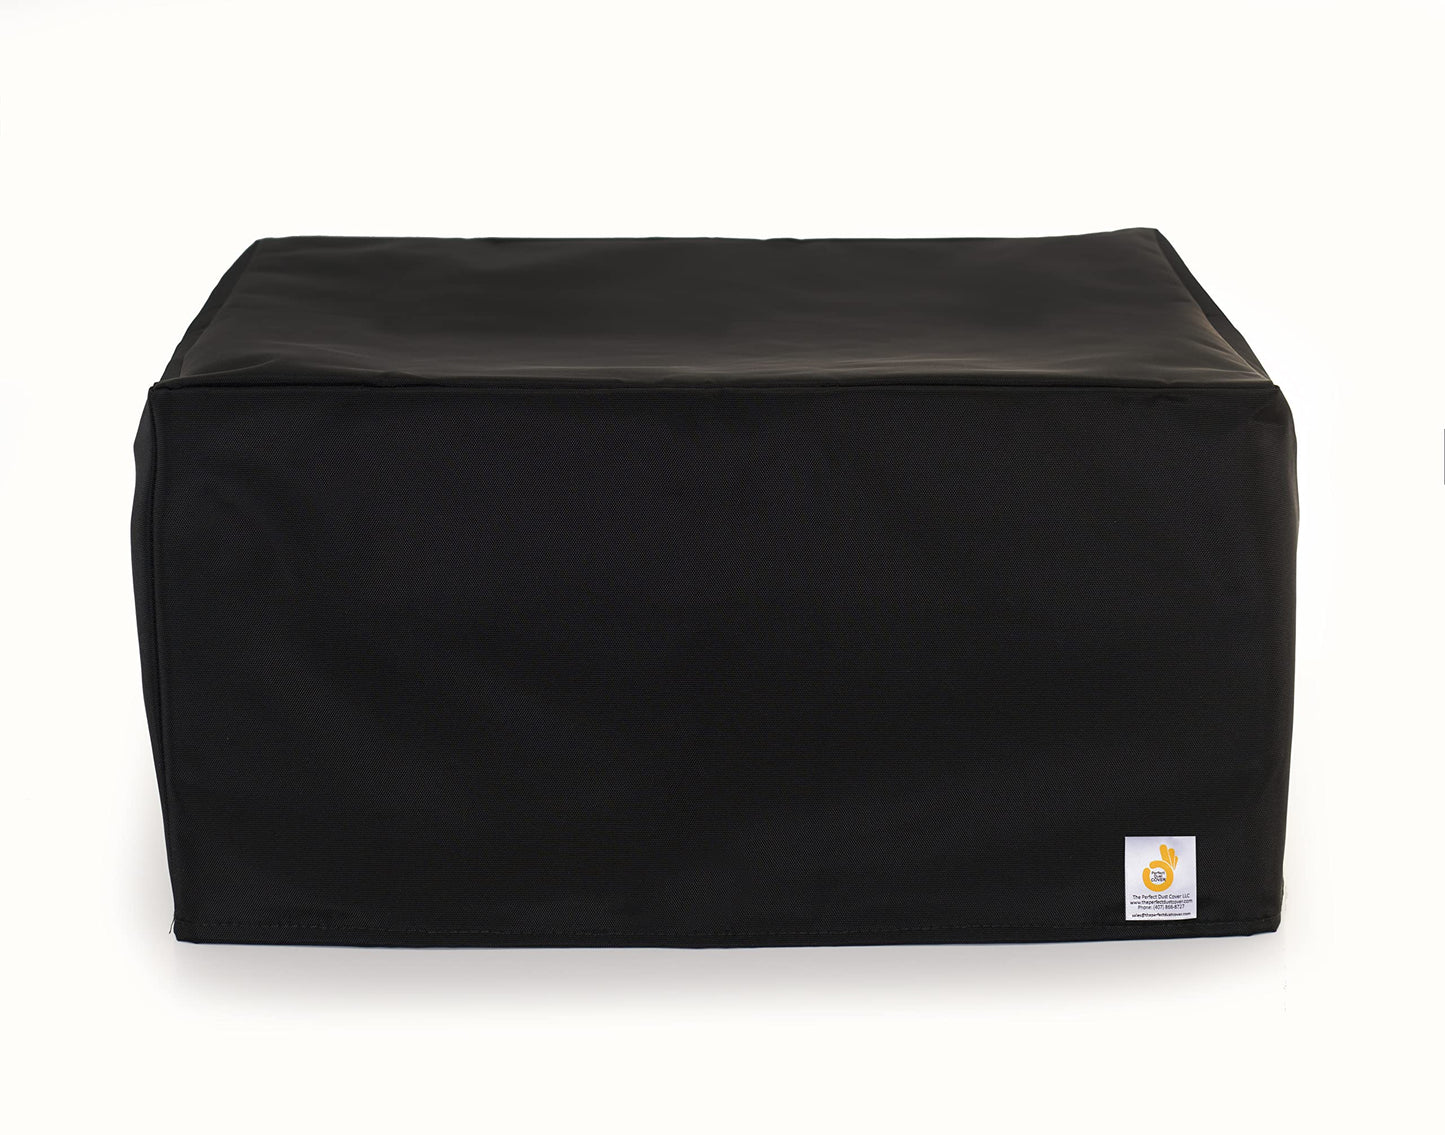 The Perfect Dust Cover, Black Nylon Cover for HP Envy Pro 6455 All-in-One Printer, Double-Stitched, Anti-Static and Waterproof Dust Cover by The Perfect Dust Cover LLC